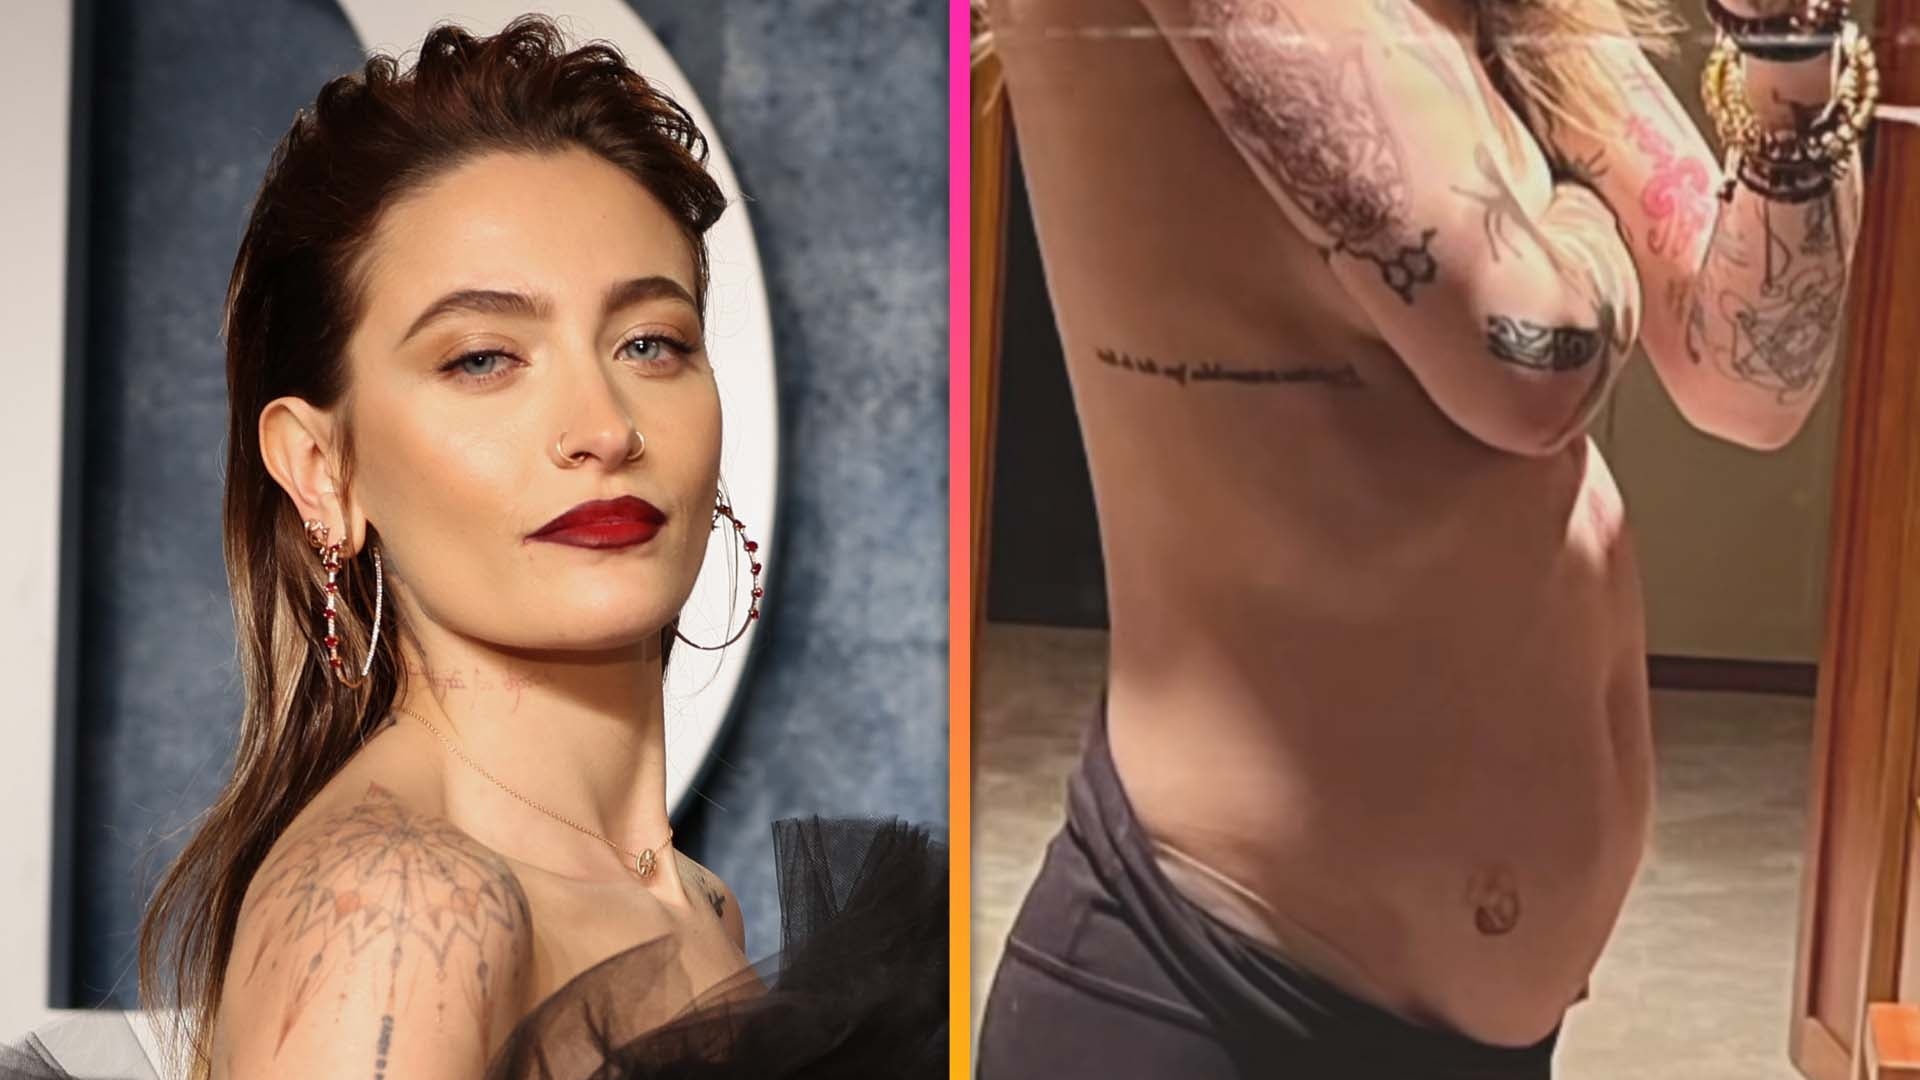 Paris Jackson Shares Unfiltered Look at Her Body Alongside Message About Beauty Standards